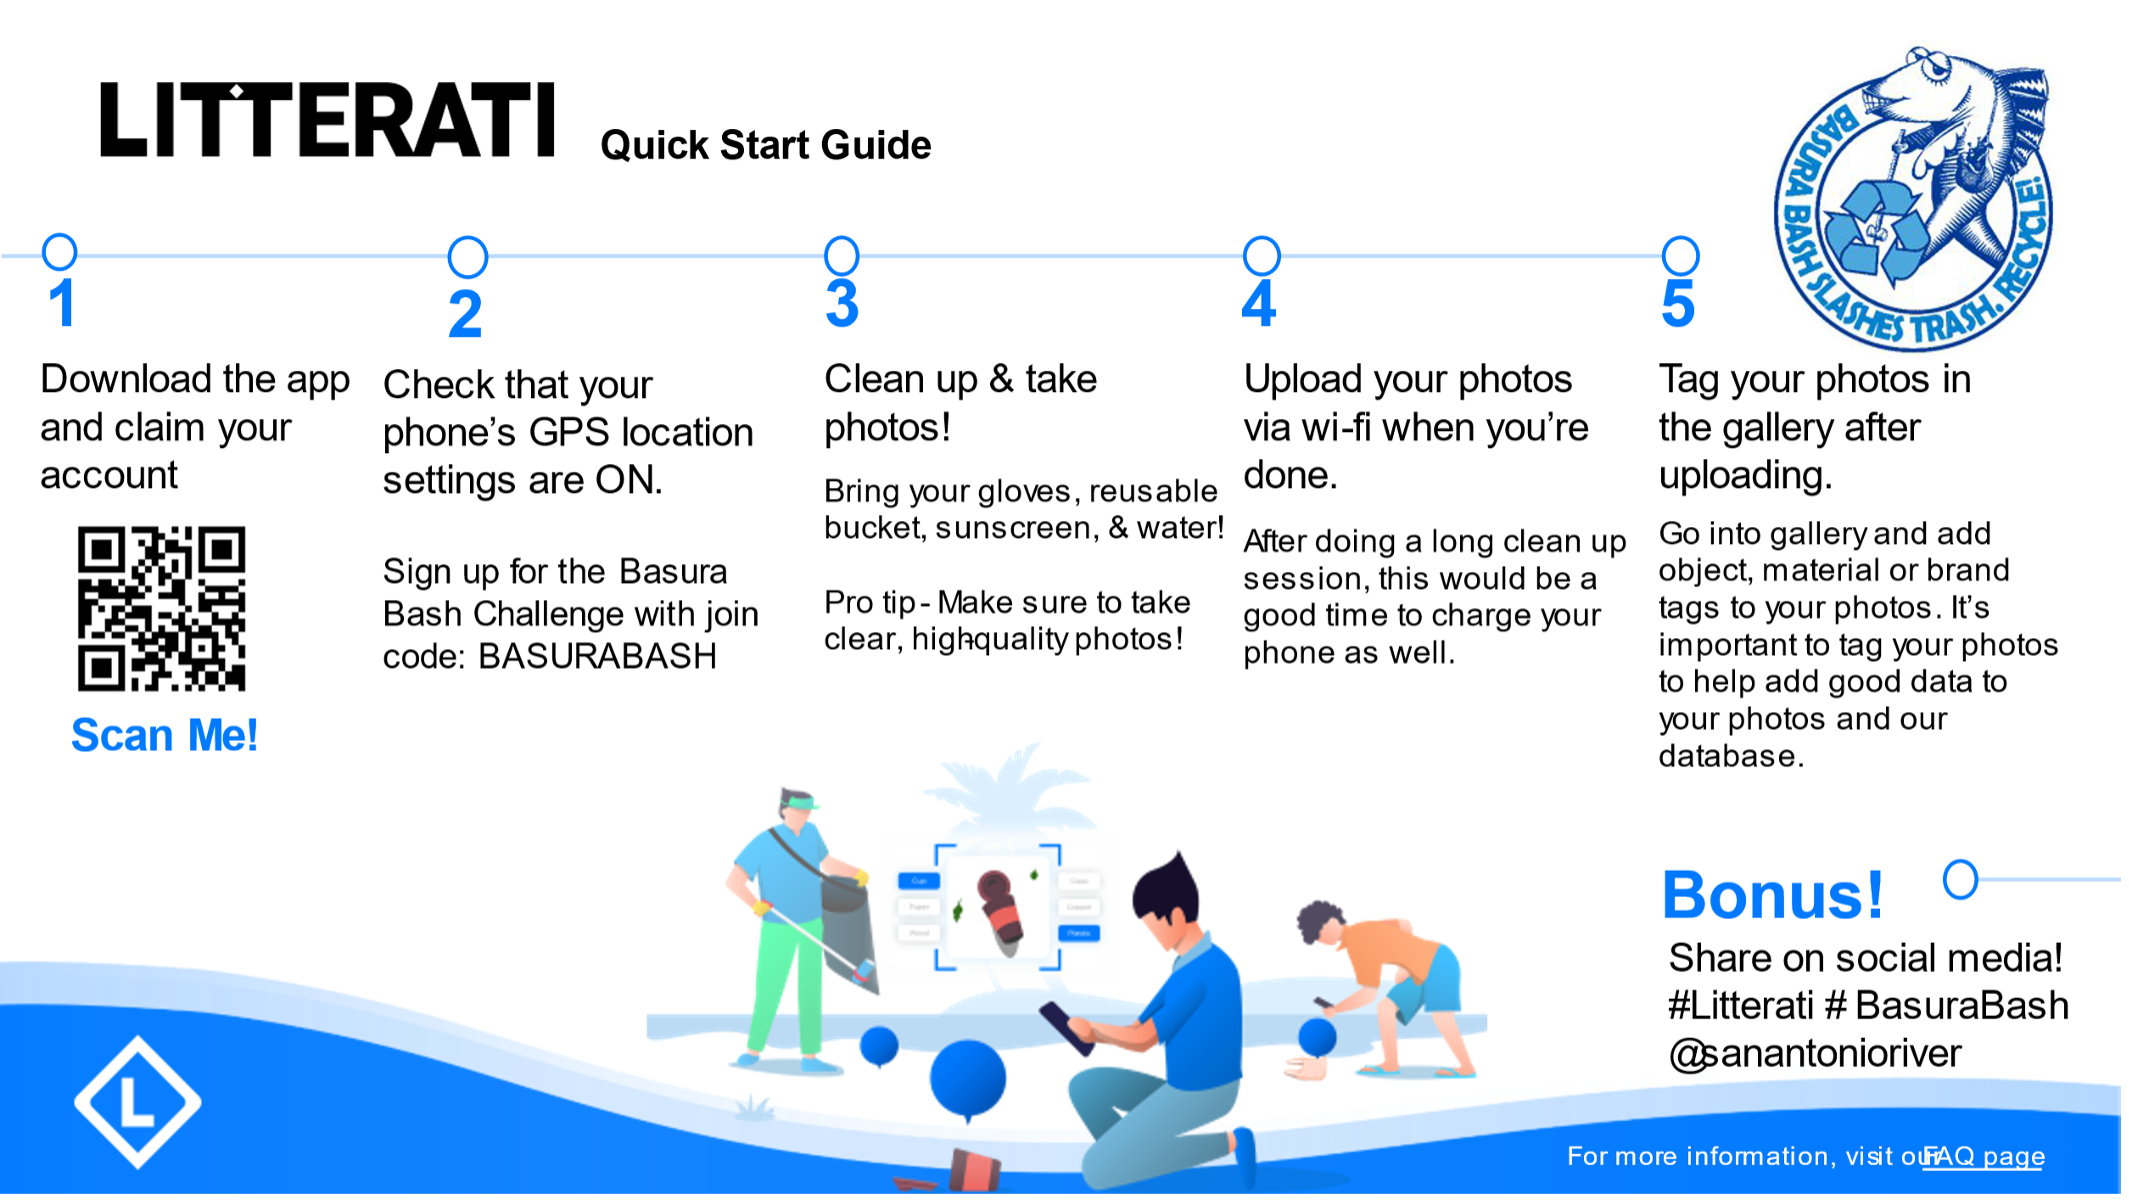 Visual graphic to use the litterati app. Download the app, check that your GPS location is on, clean up and take photos, upload your photos and tag!